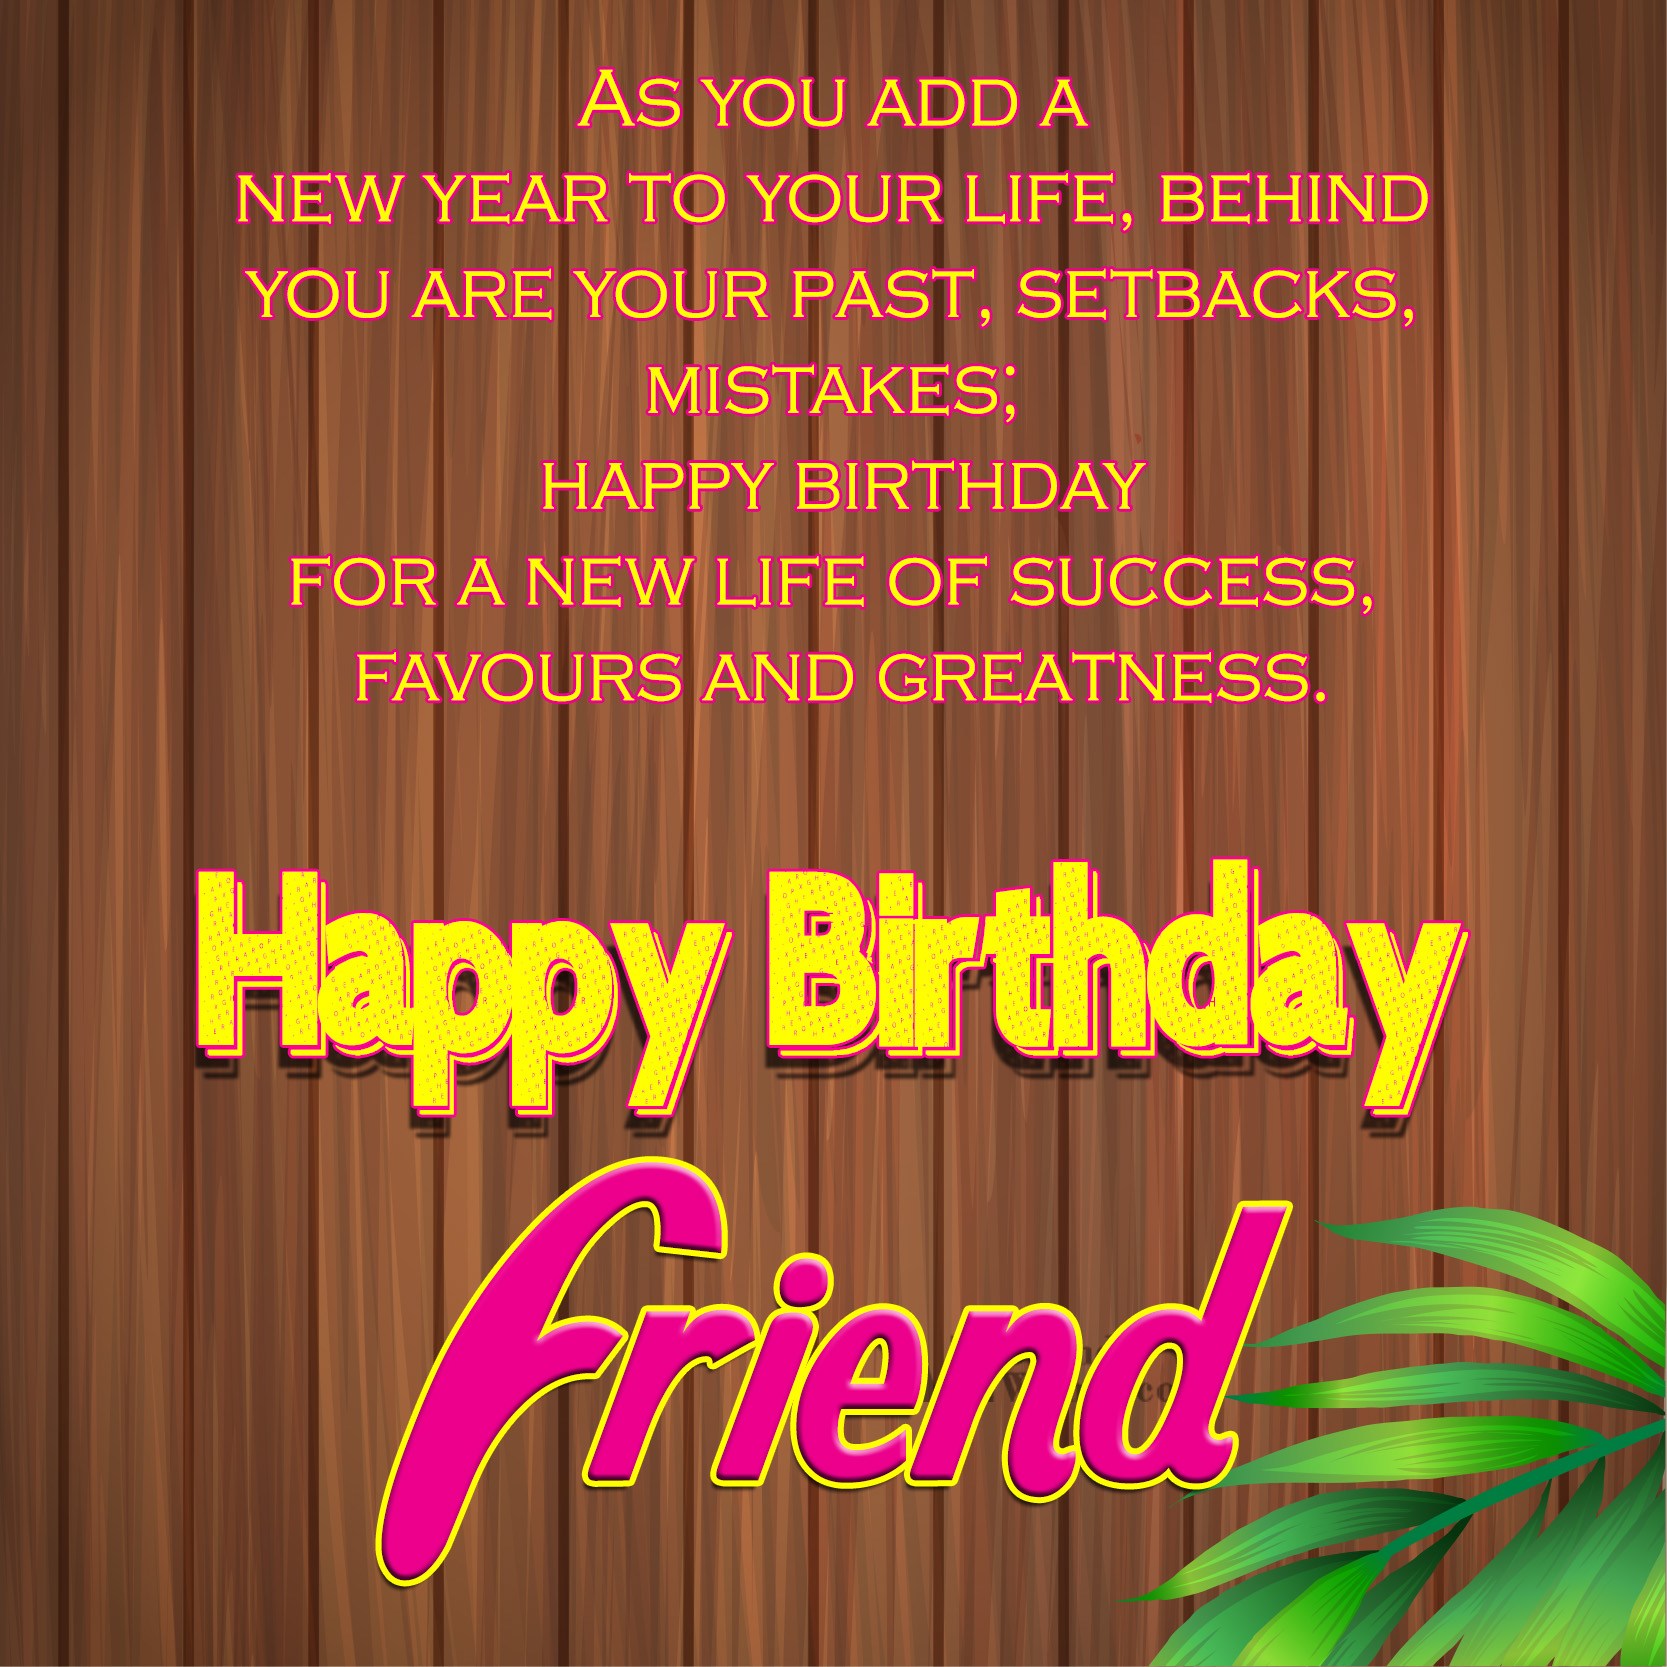 birthday-wishes-for-friend-birthday-images-pictures-azbirthdaywishes